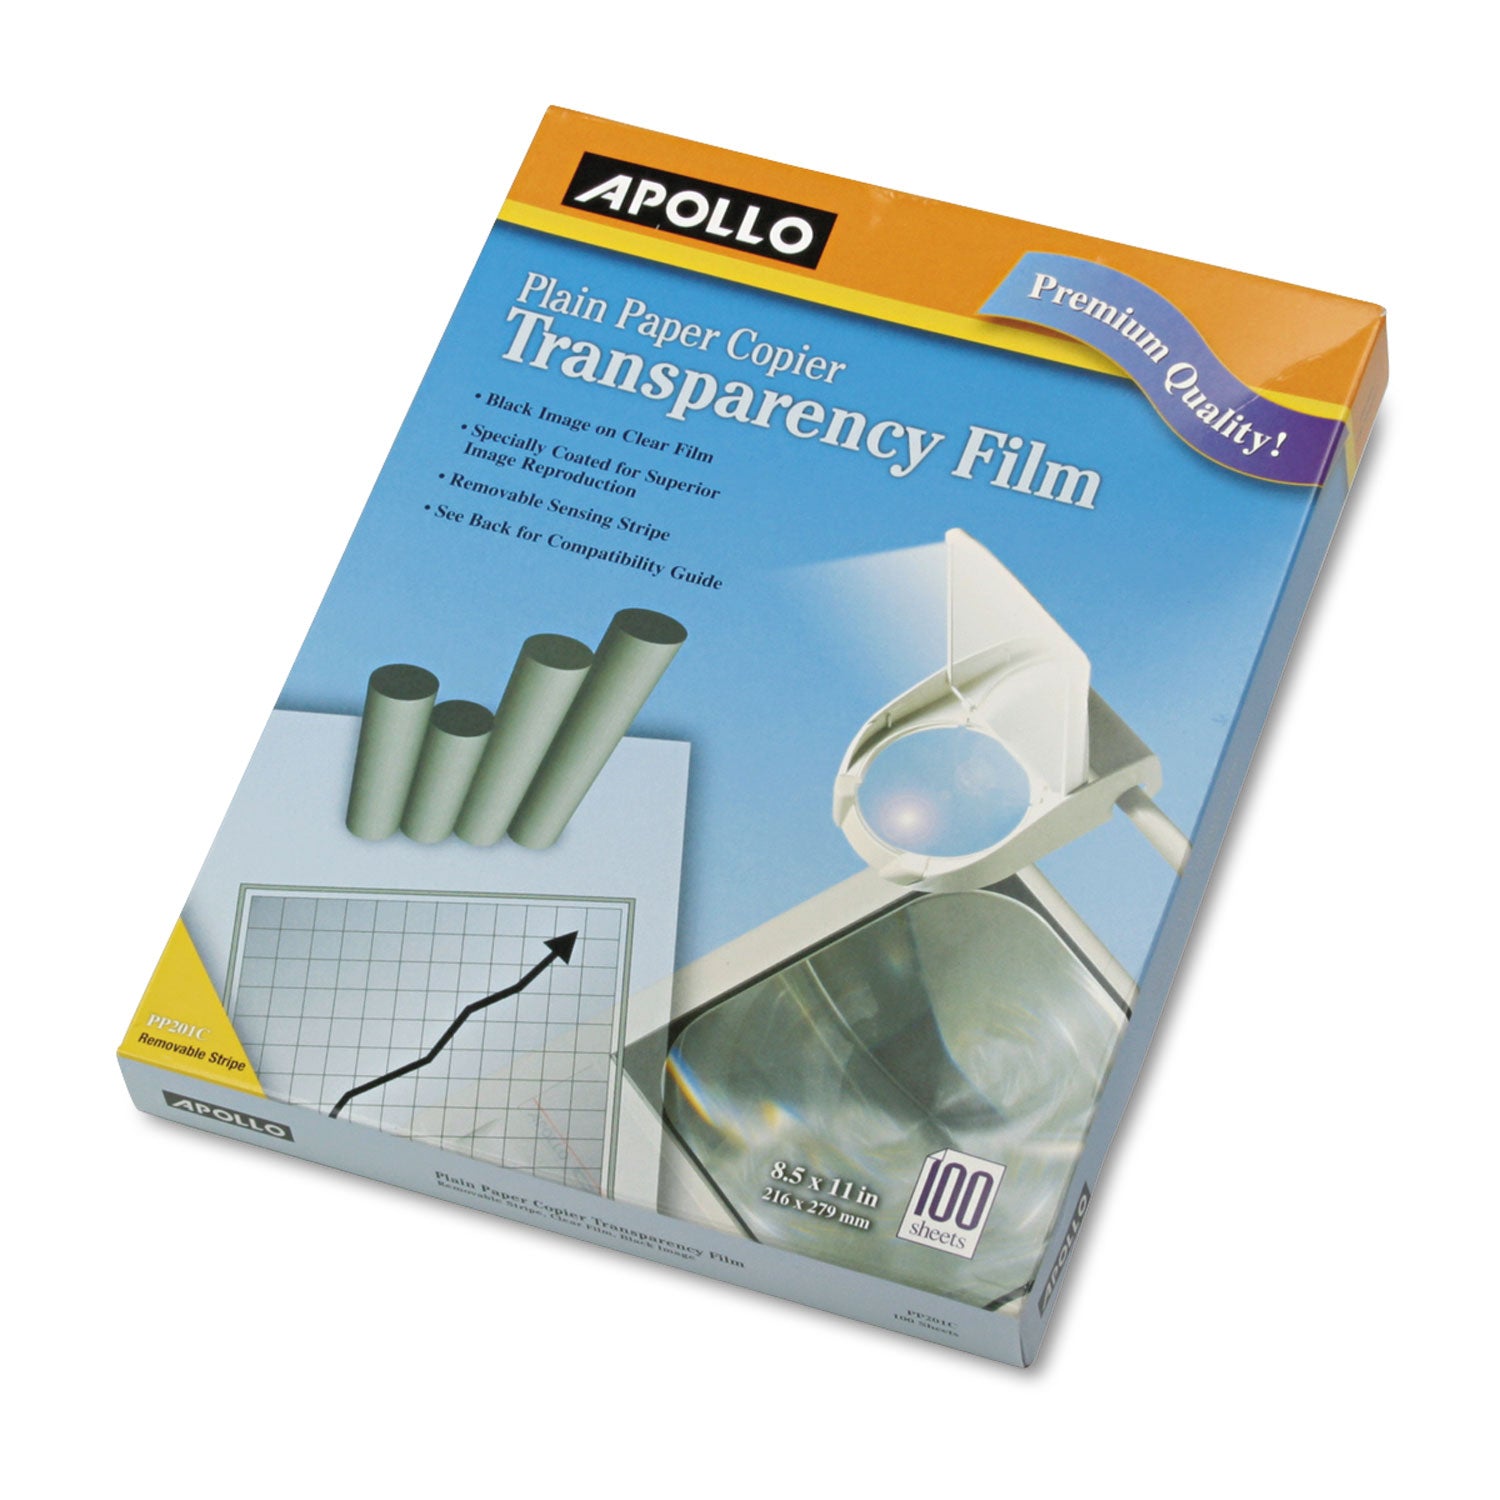 Plain Paper Laser Transparency Film with Handling Strip, 8.5 x 11, Black on Clear, 100/Box - 